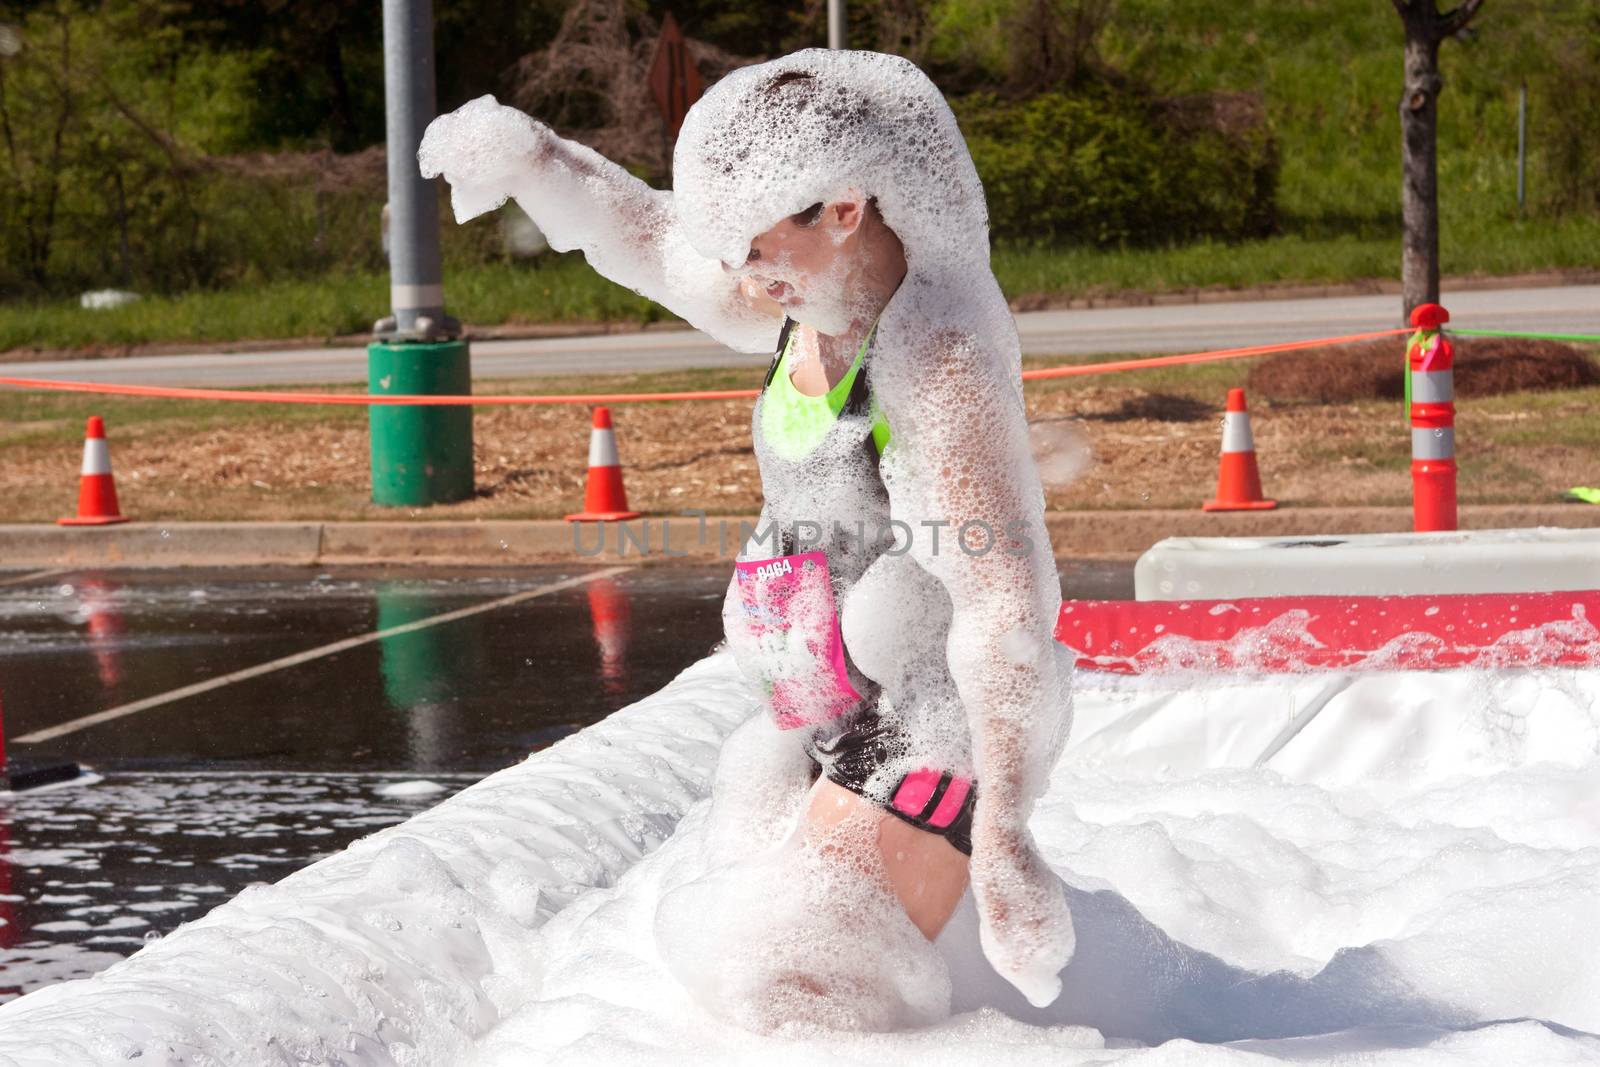 Atlanta, GA USA - April 5, 2014:  A young woman emerges from the foam pit covered head to toe in bubbles, at   the Ridiculous Obstacle Challenge (ROC) 5k race.